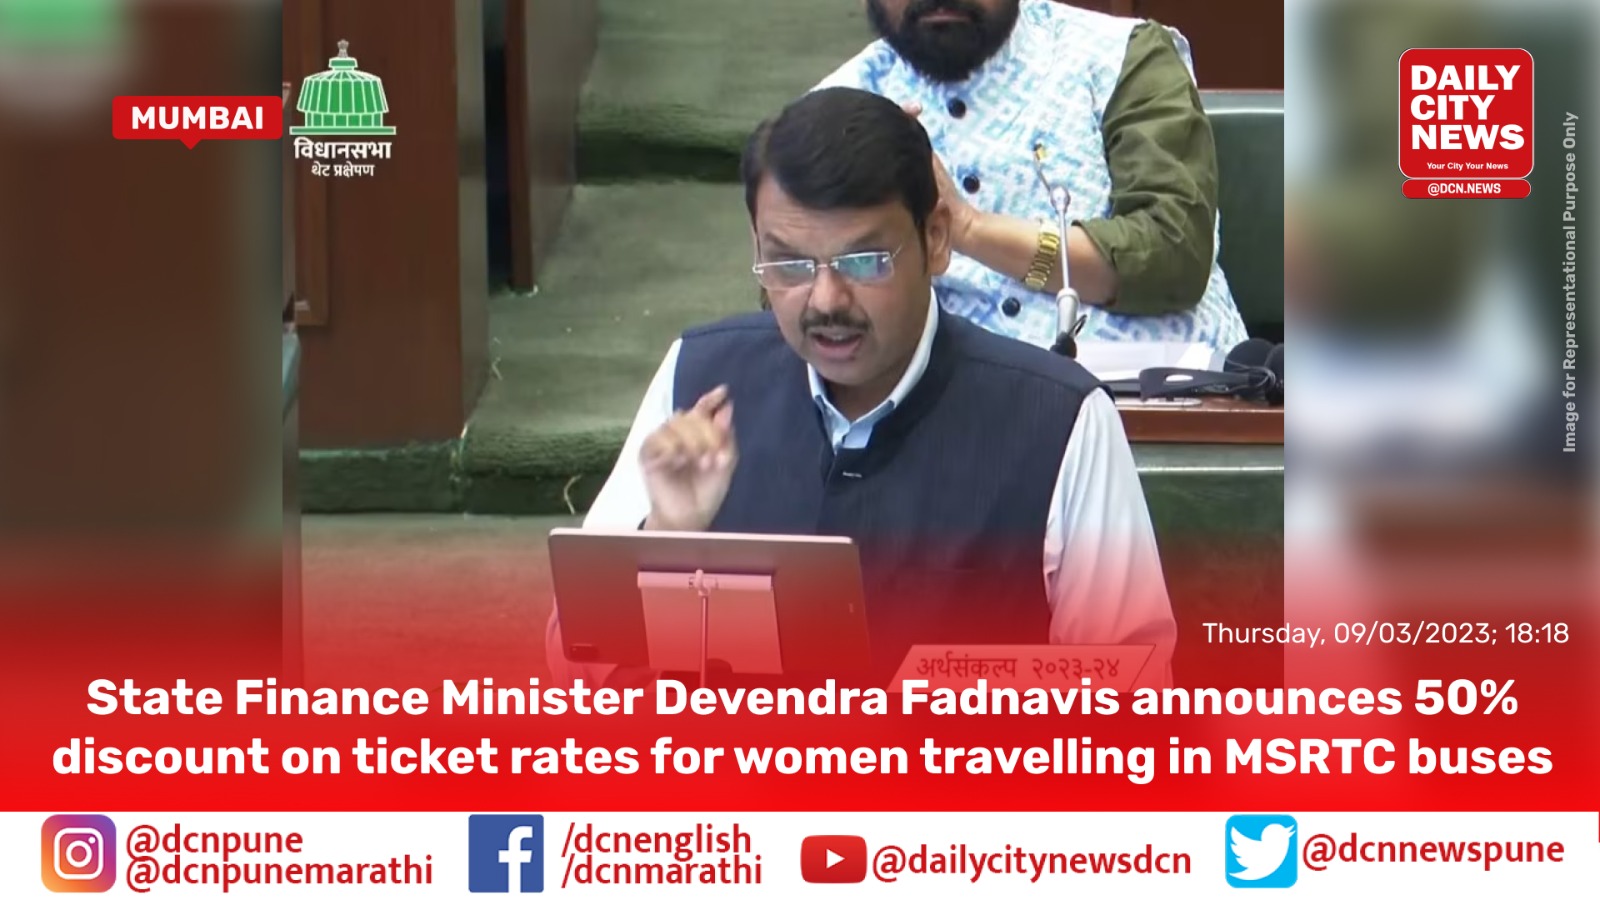 State Finance Minister Devendra Fadnavis announces 50% discount on ticket rates for women travelling in MSRTC buses